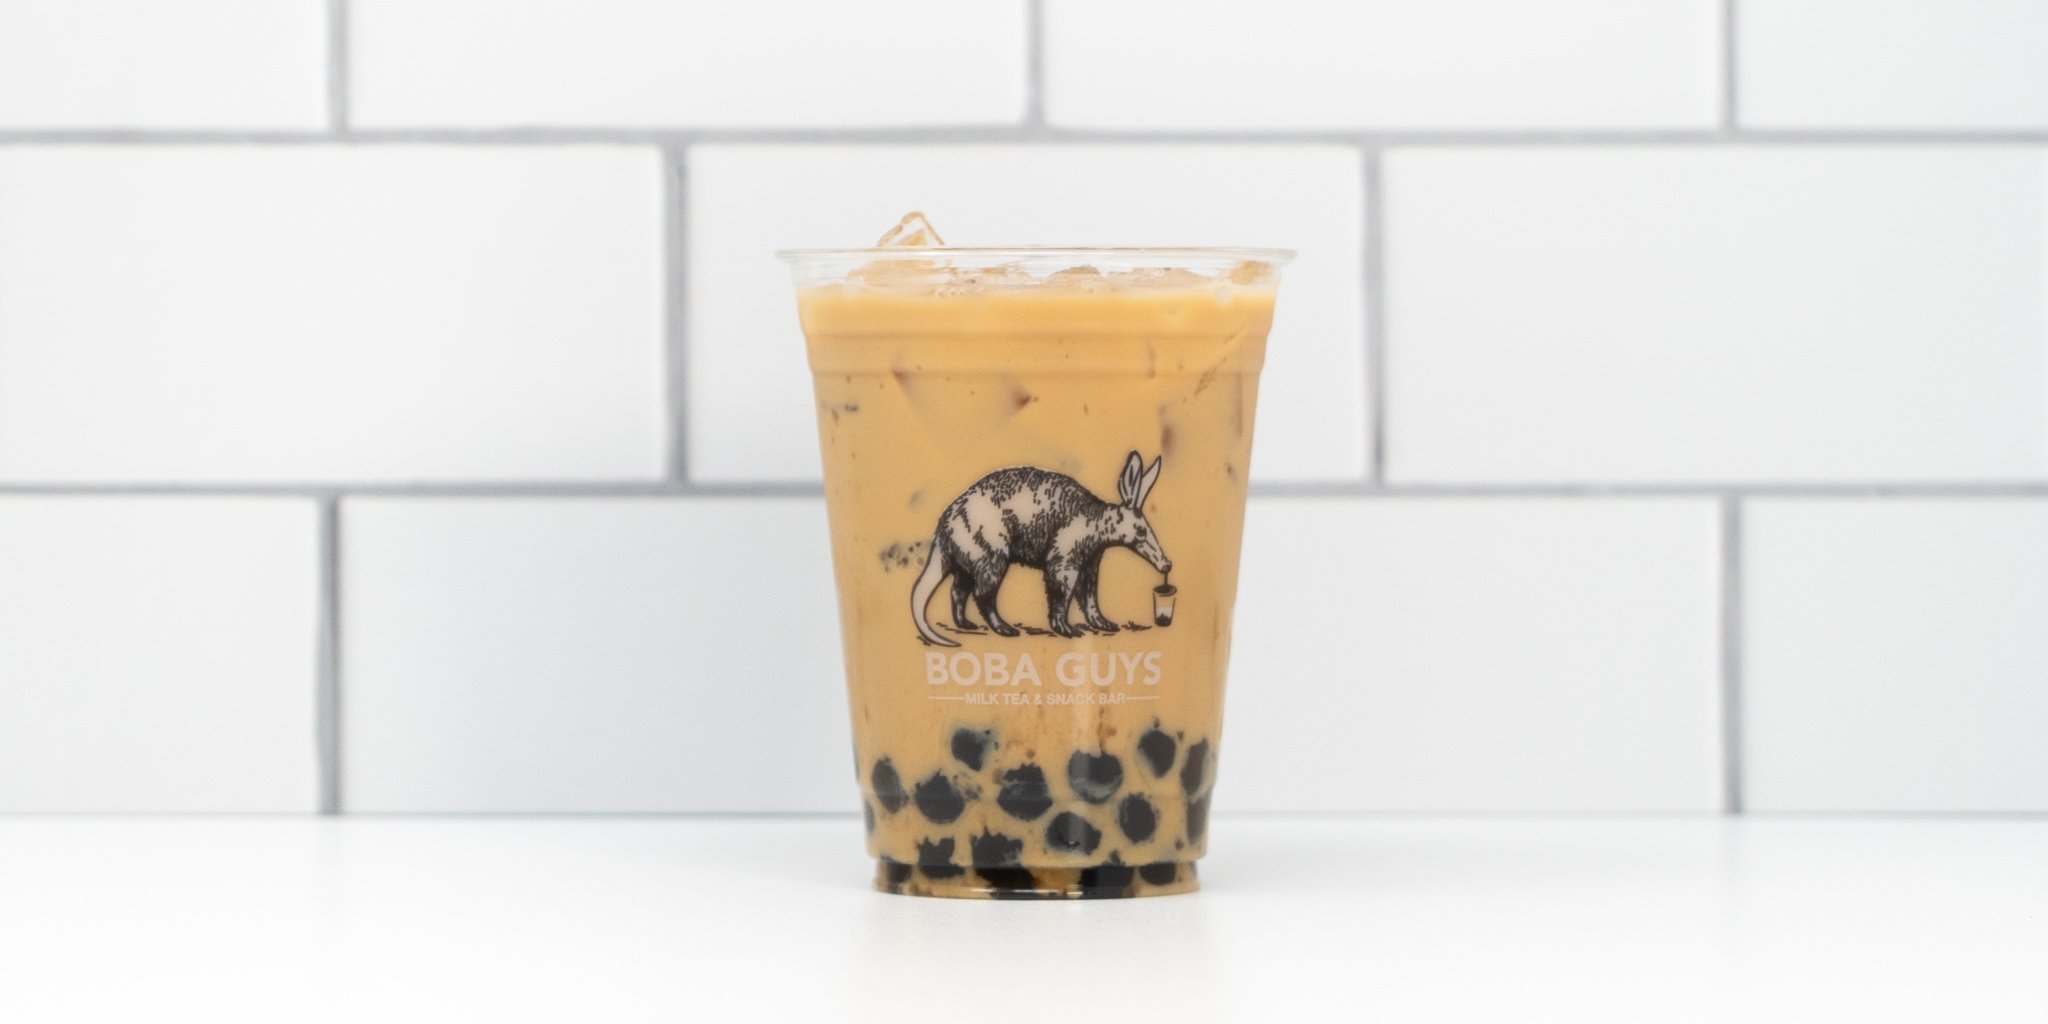 PLA — Boba Guys - Serving the highest quality bubble milk tea in